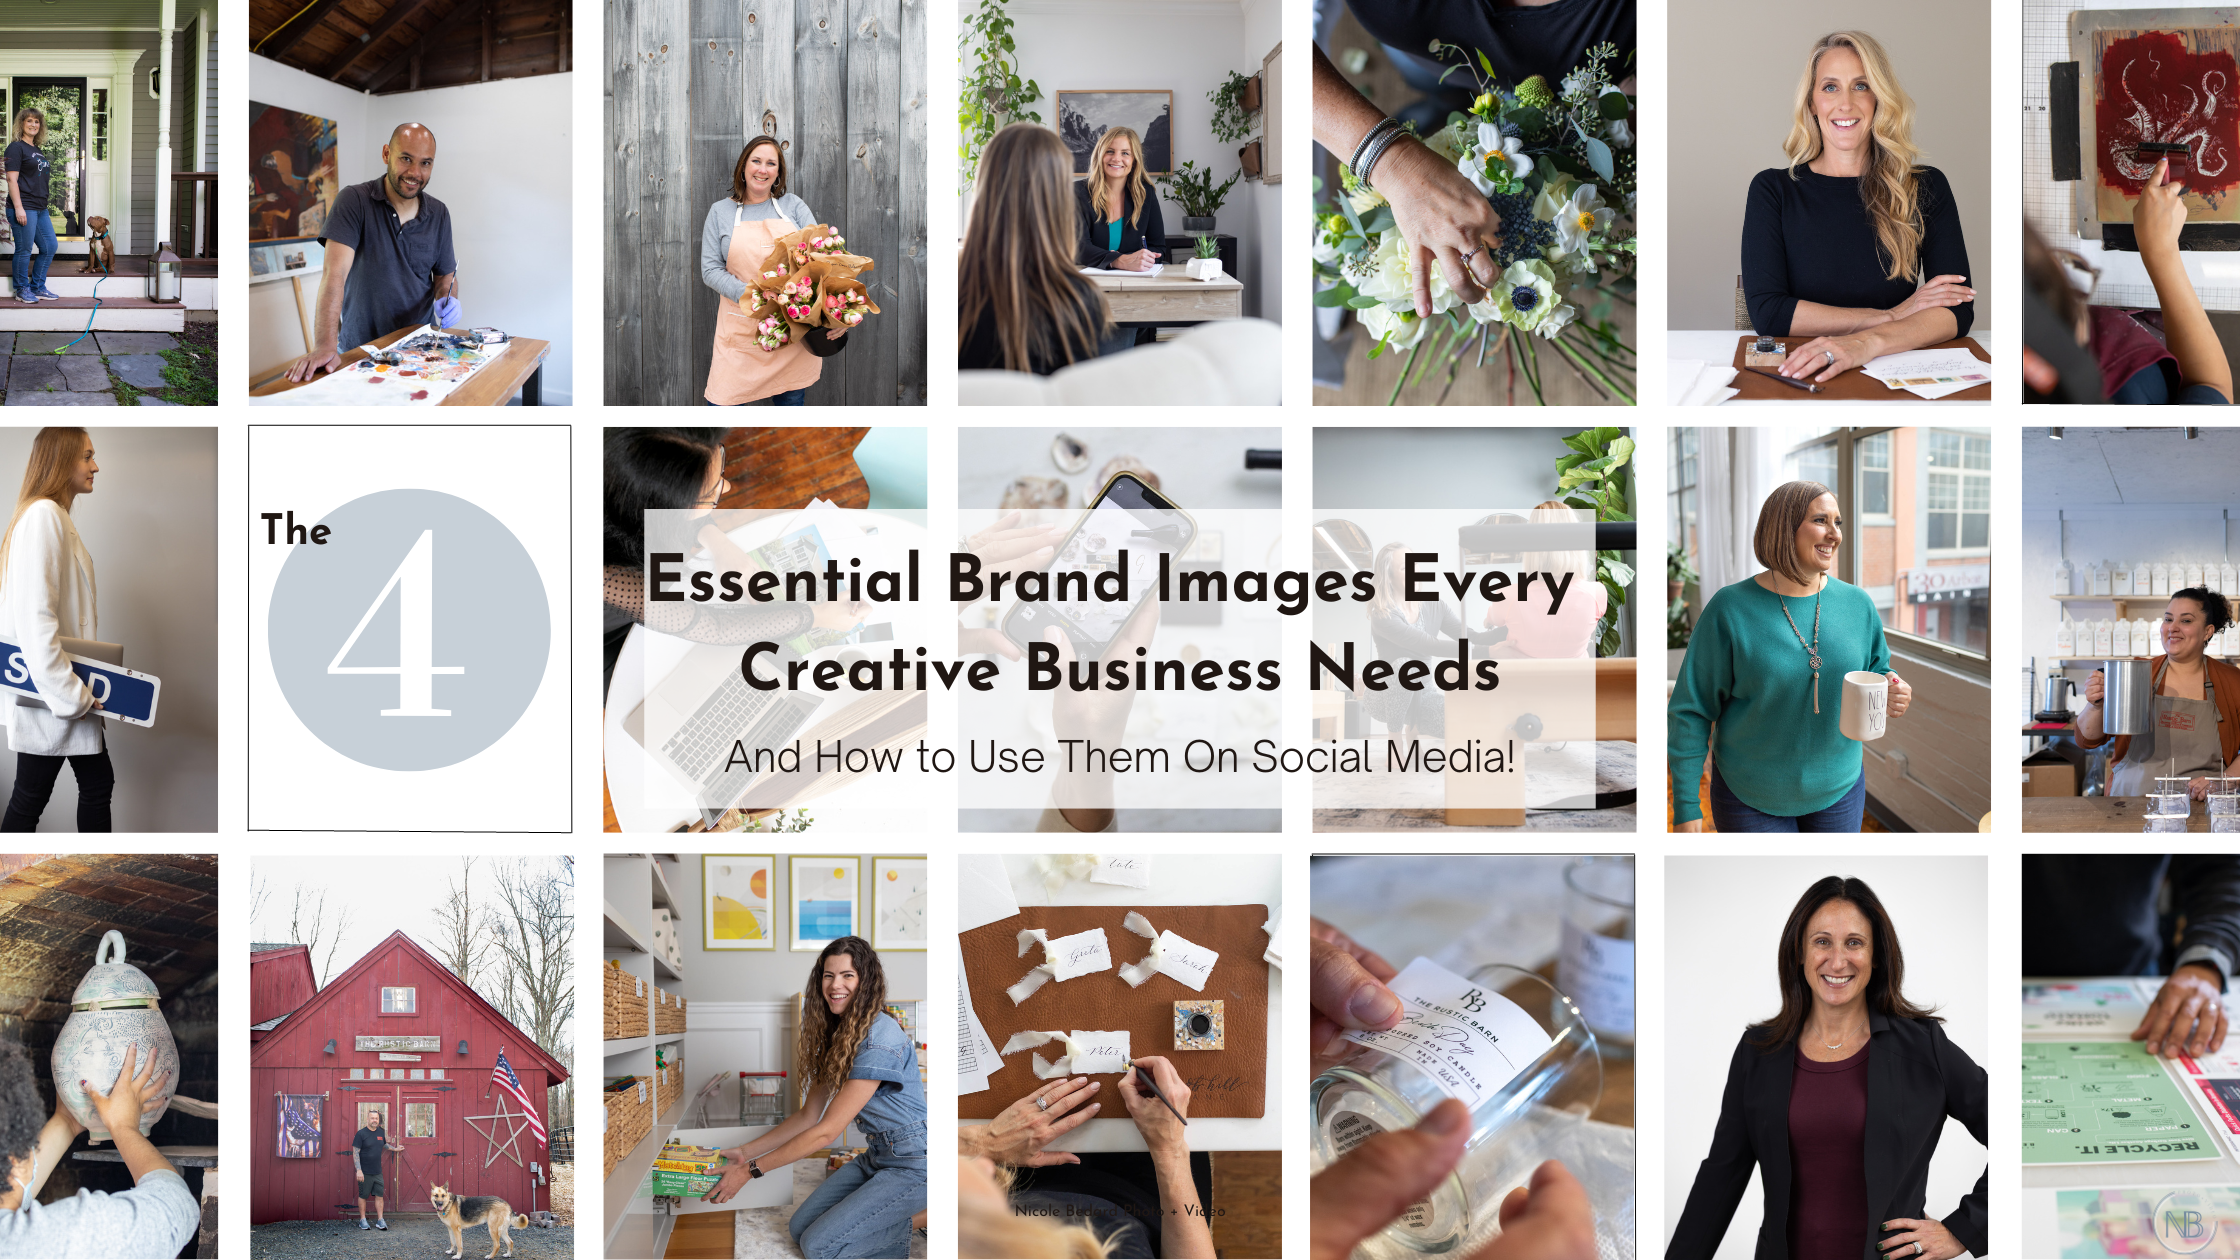 The 4 Essential Brand Images Every Creative Business Needs